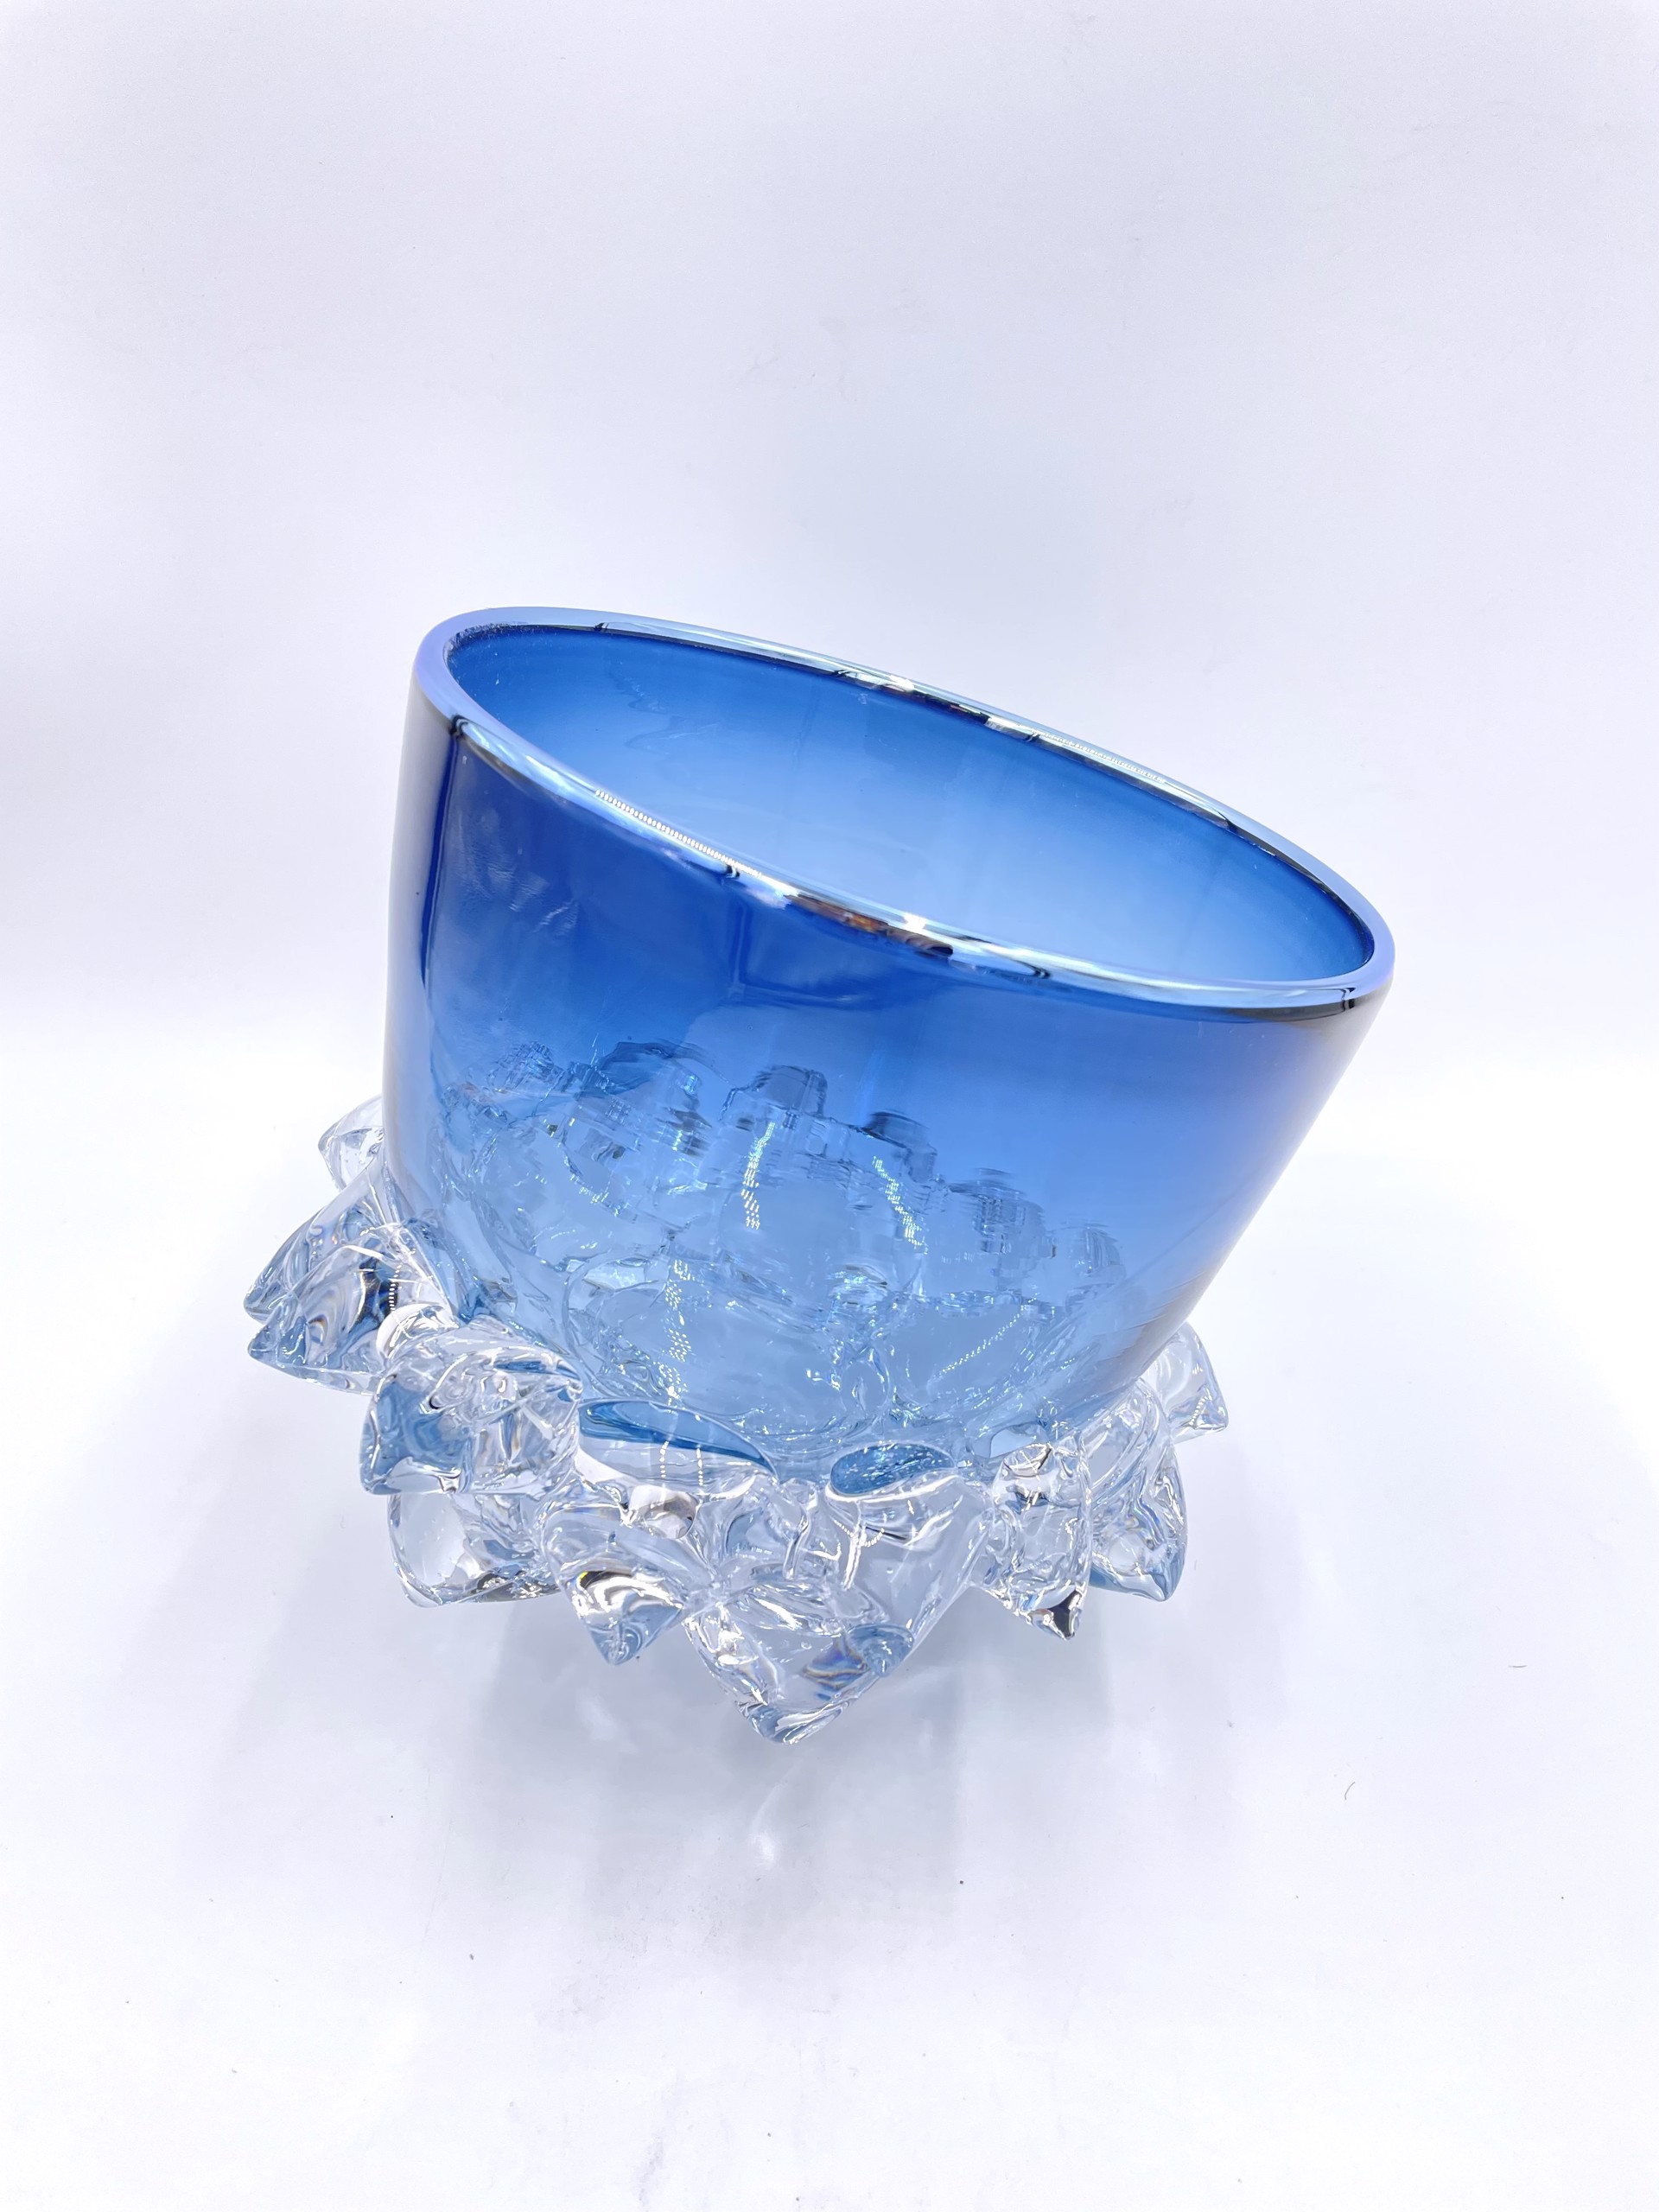 Thorn Vessel Cobalt 7" by Andrew Madvin